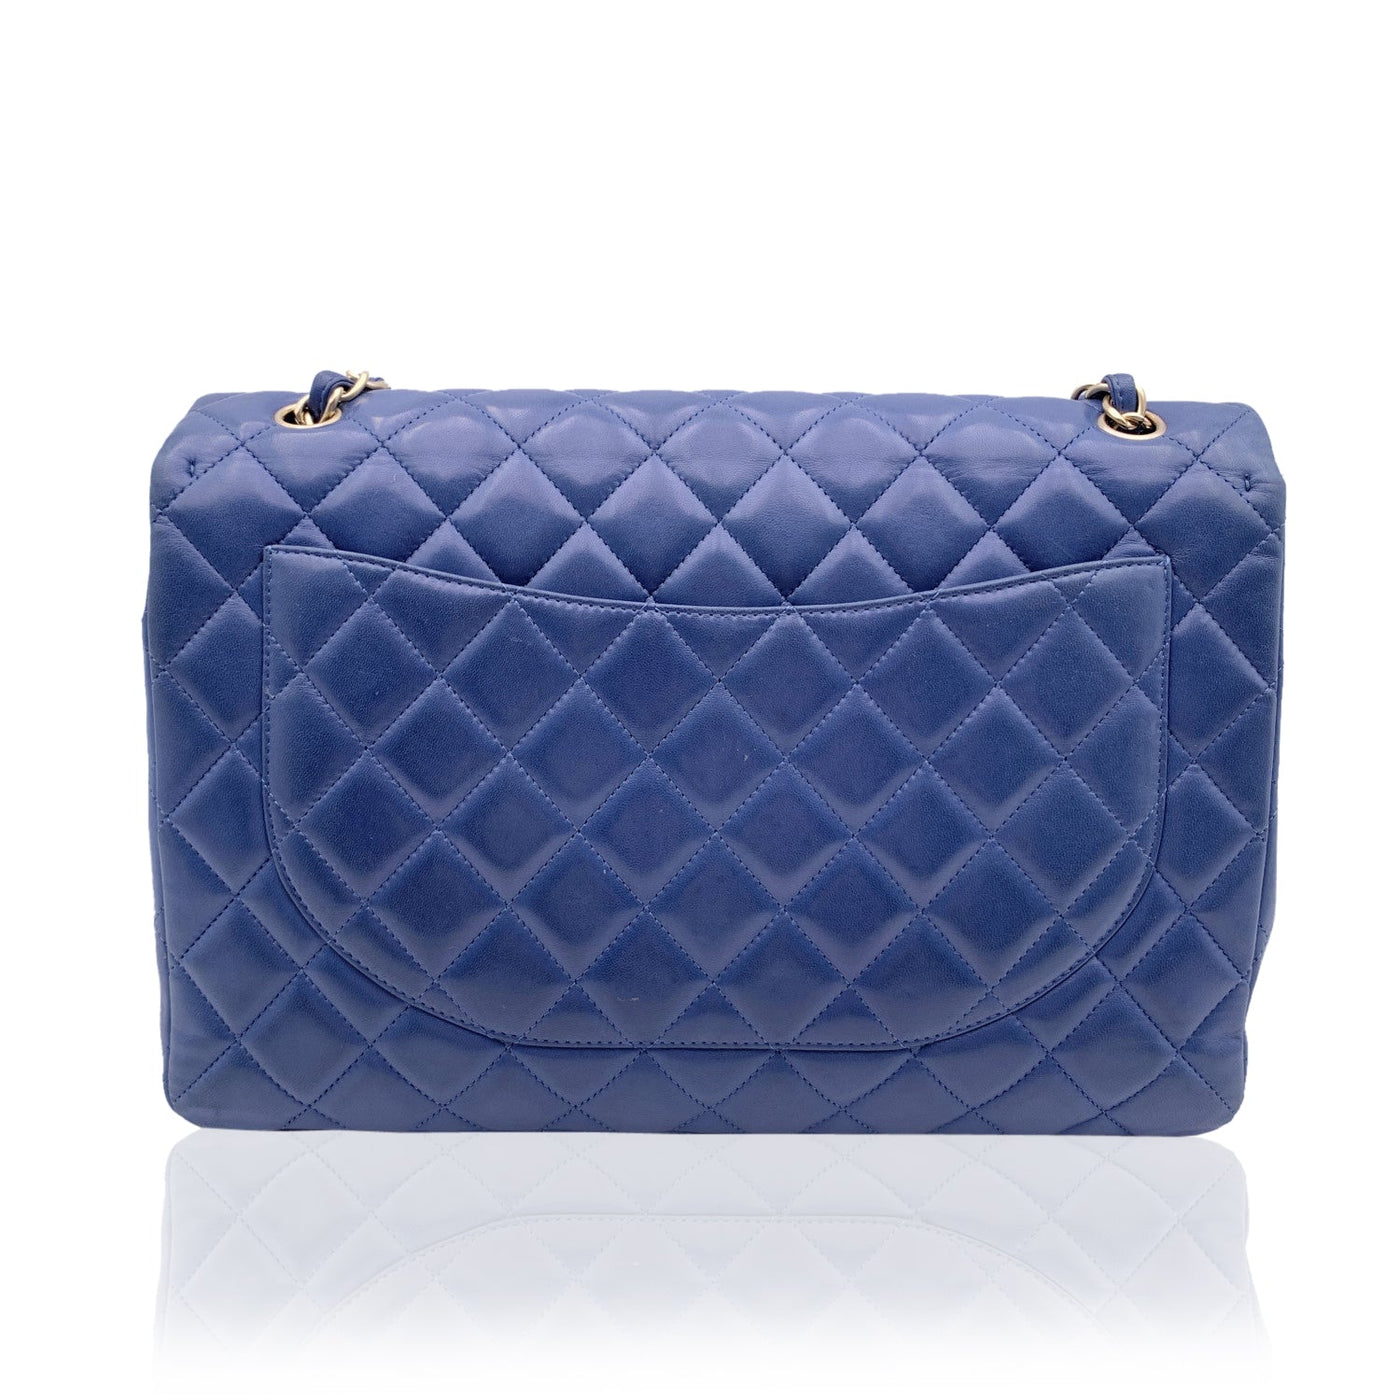 Chanel Blue Quilted Leather Maxi Timeless Classic 2.55 Single Flap